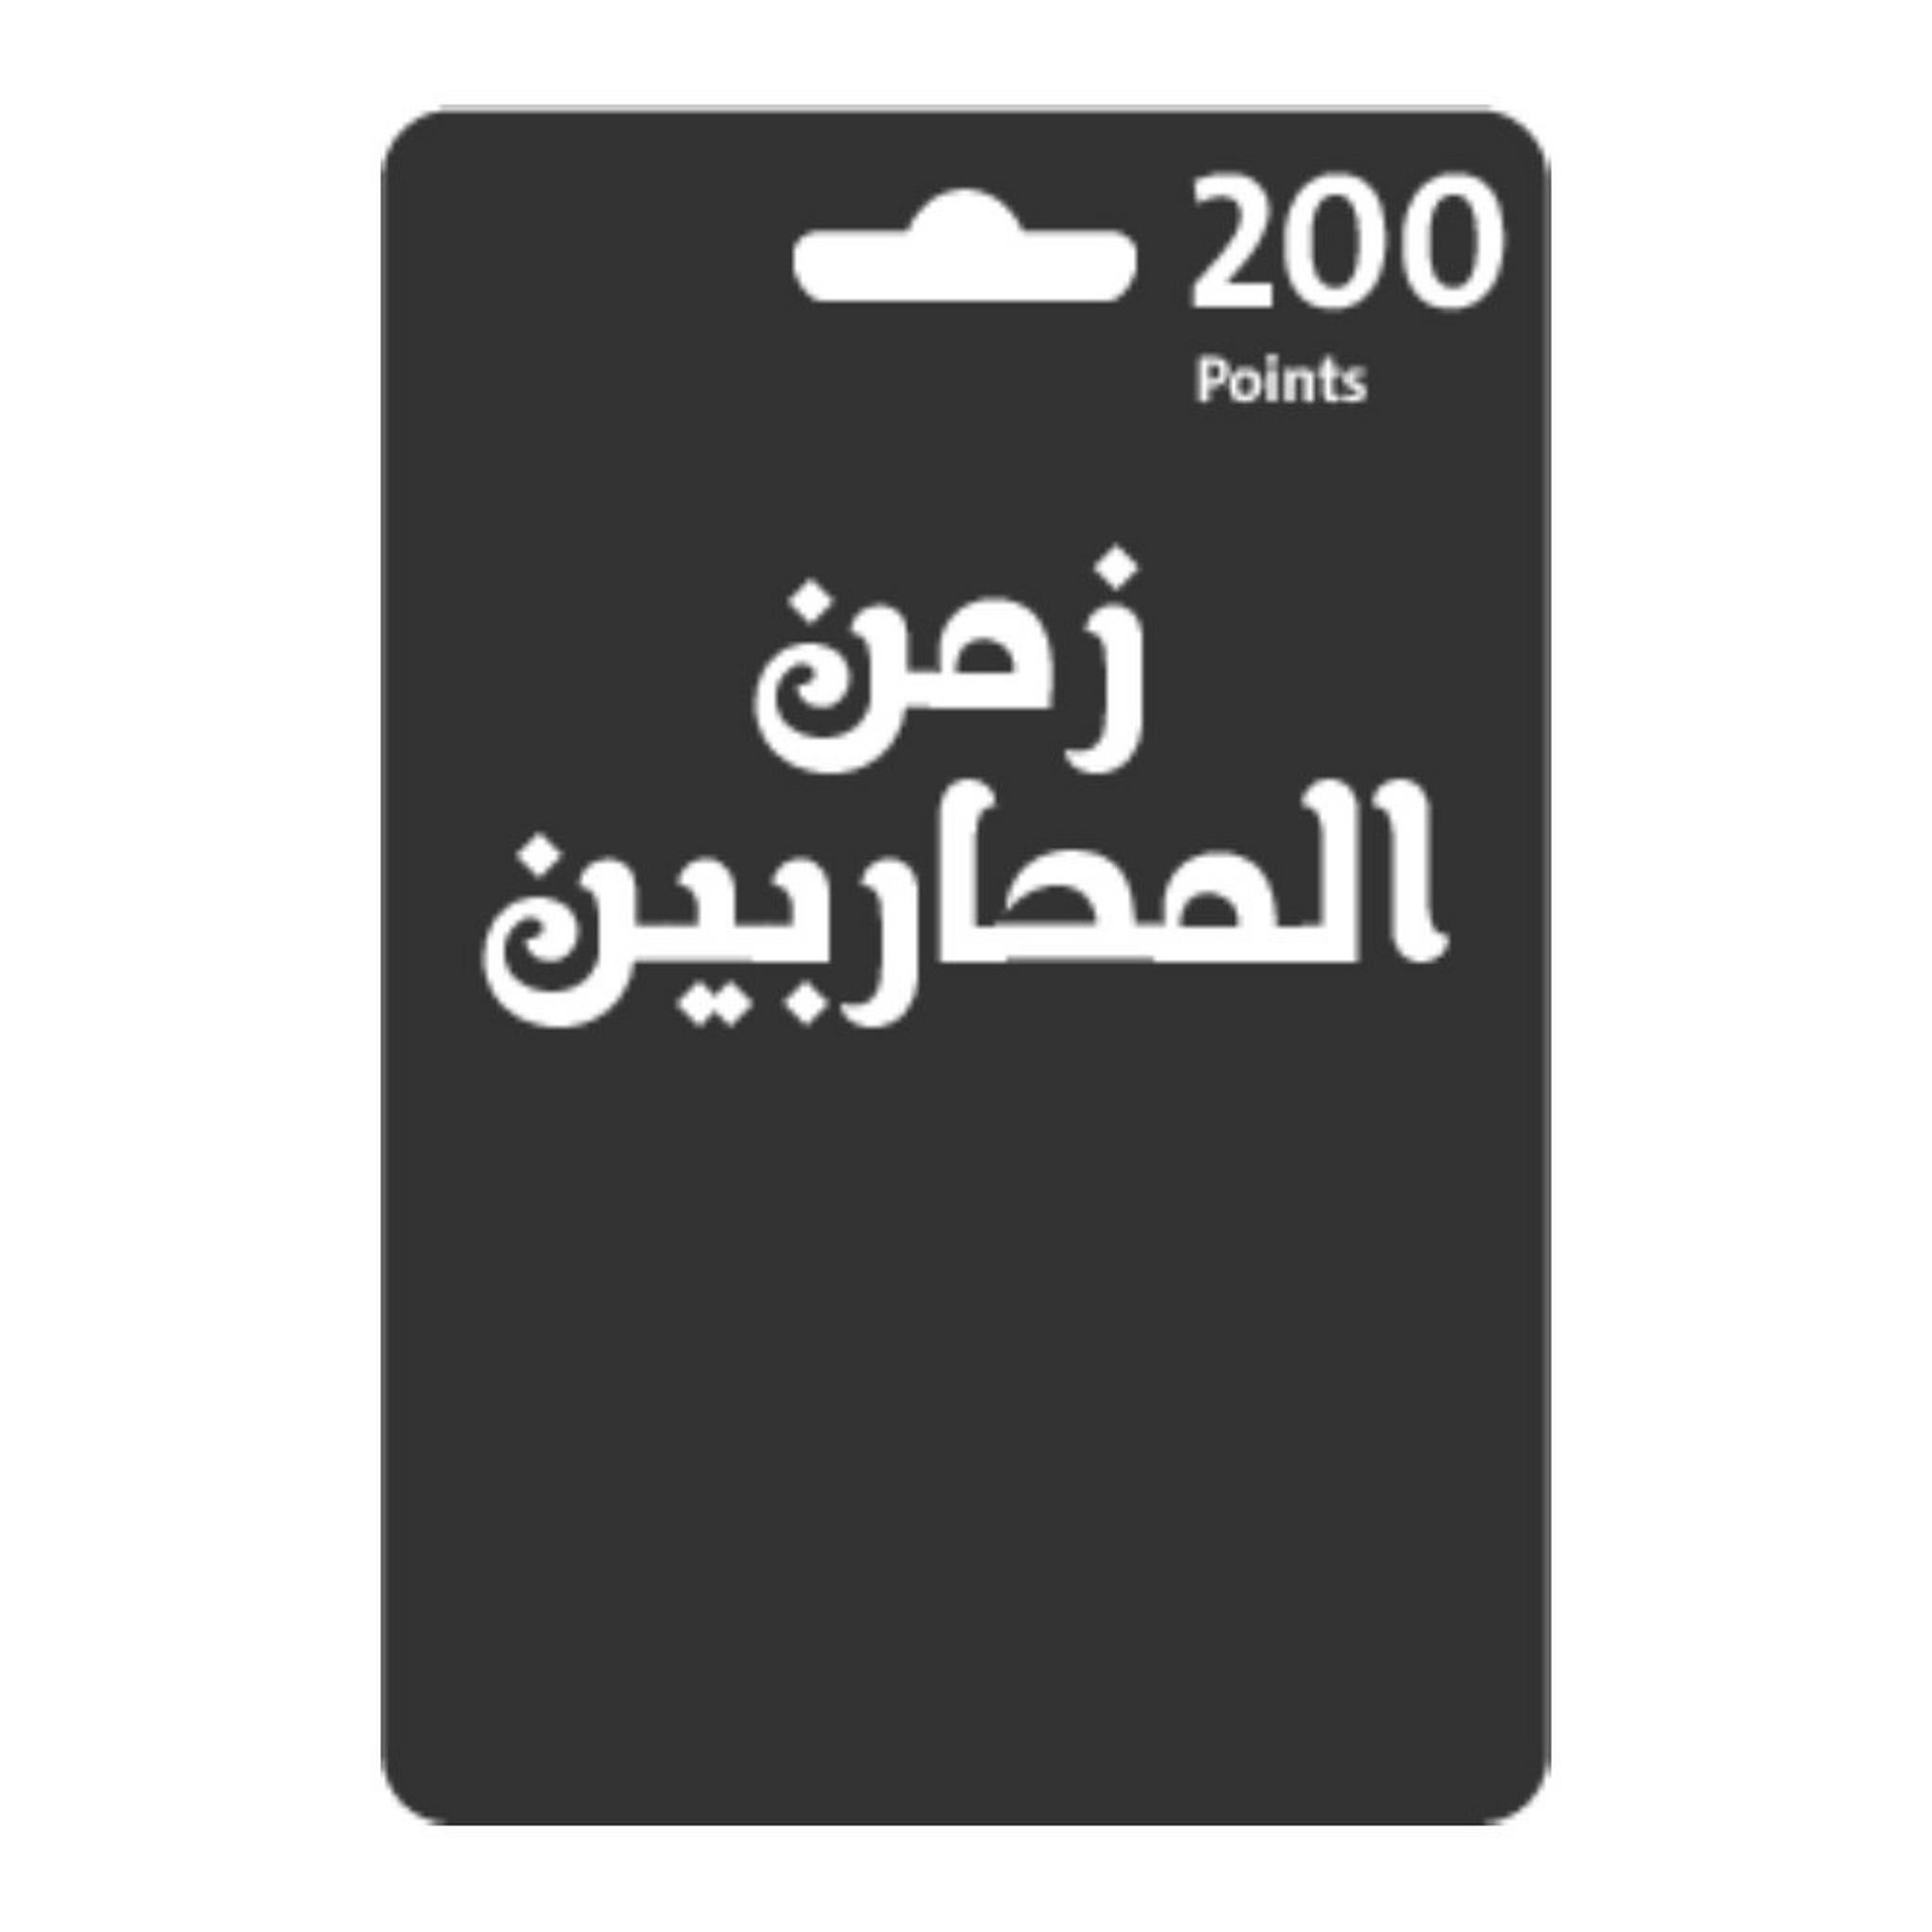 Zaman Almoharbeen 200 Points Card